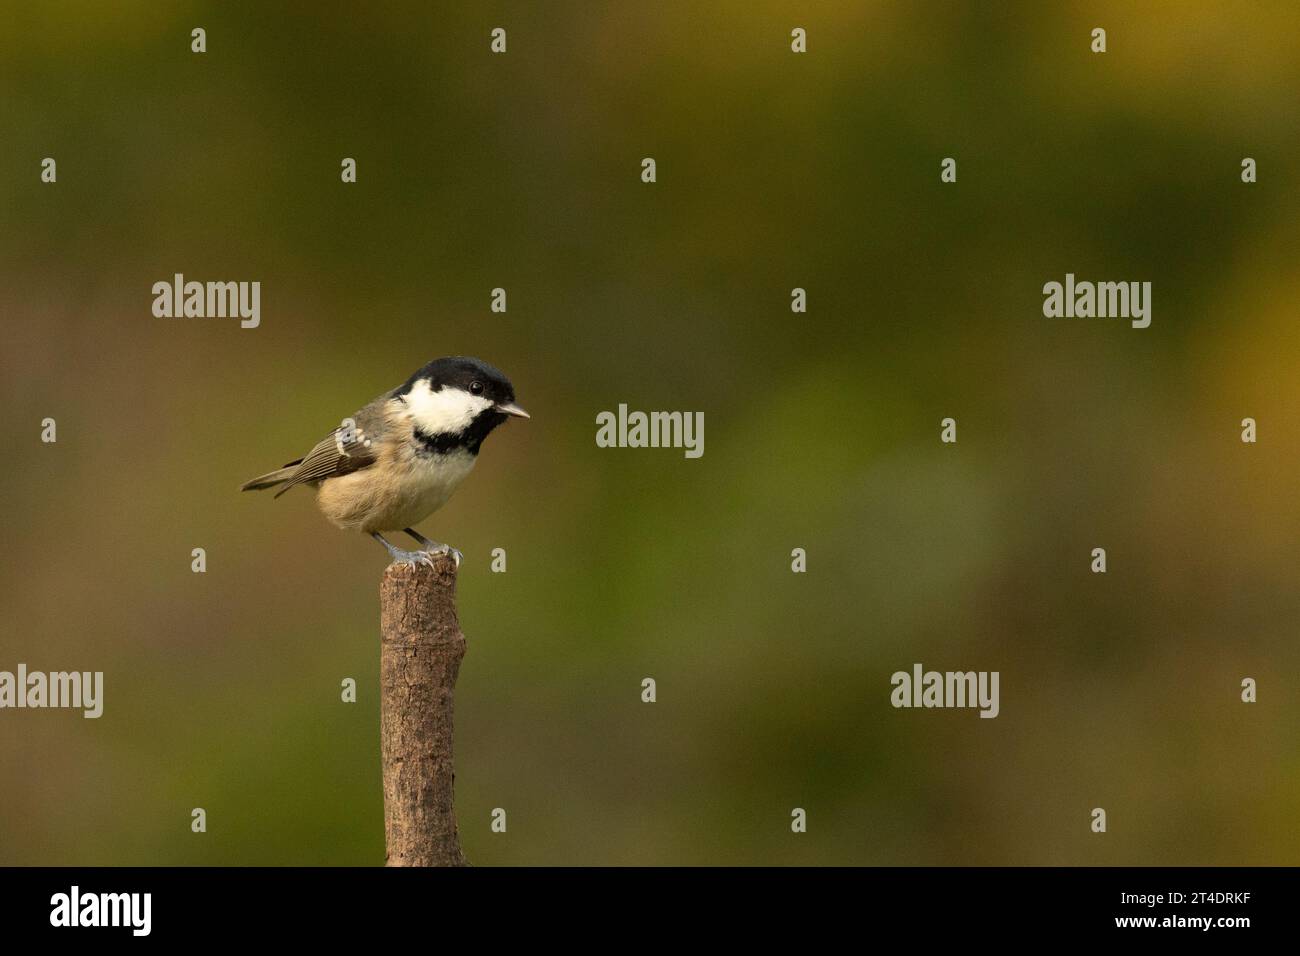 A coal tit (Periparus ater) photographed at Daisy Nook Country Park, Oldham, UK Stock Photo